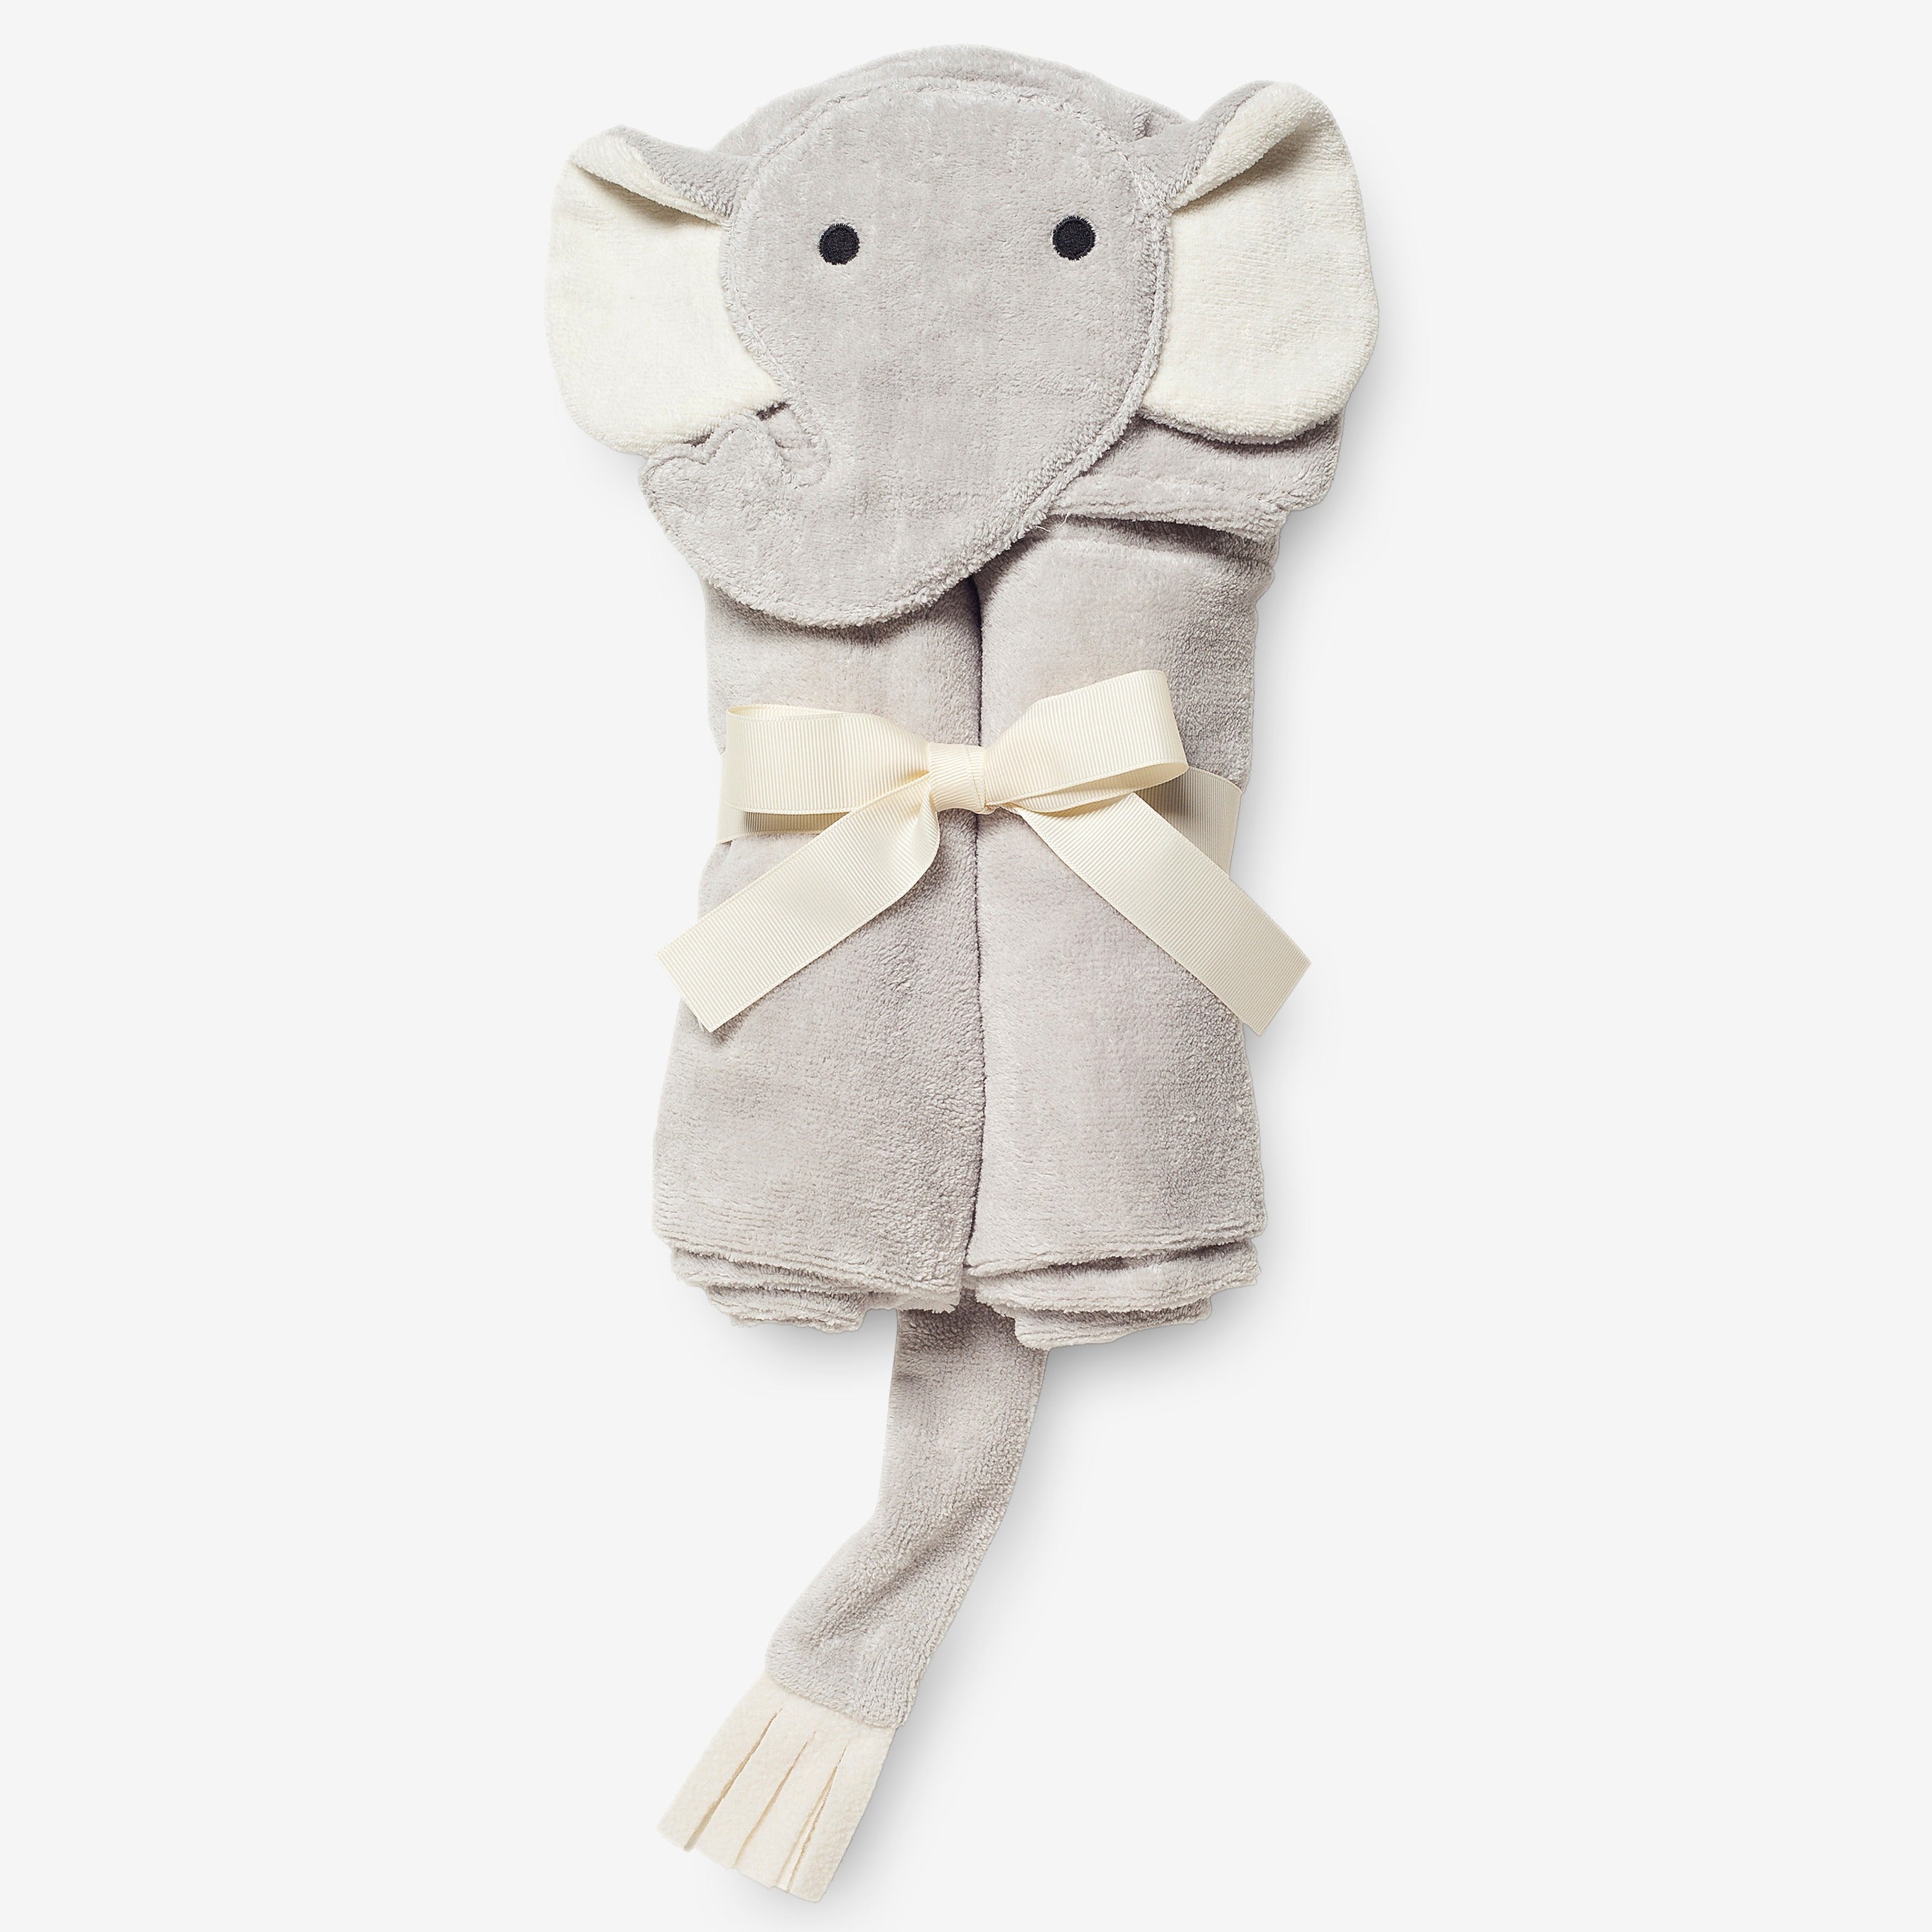 Infant Baby Neutral Gray Elephant Shower Gift Wrapping Paper